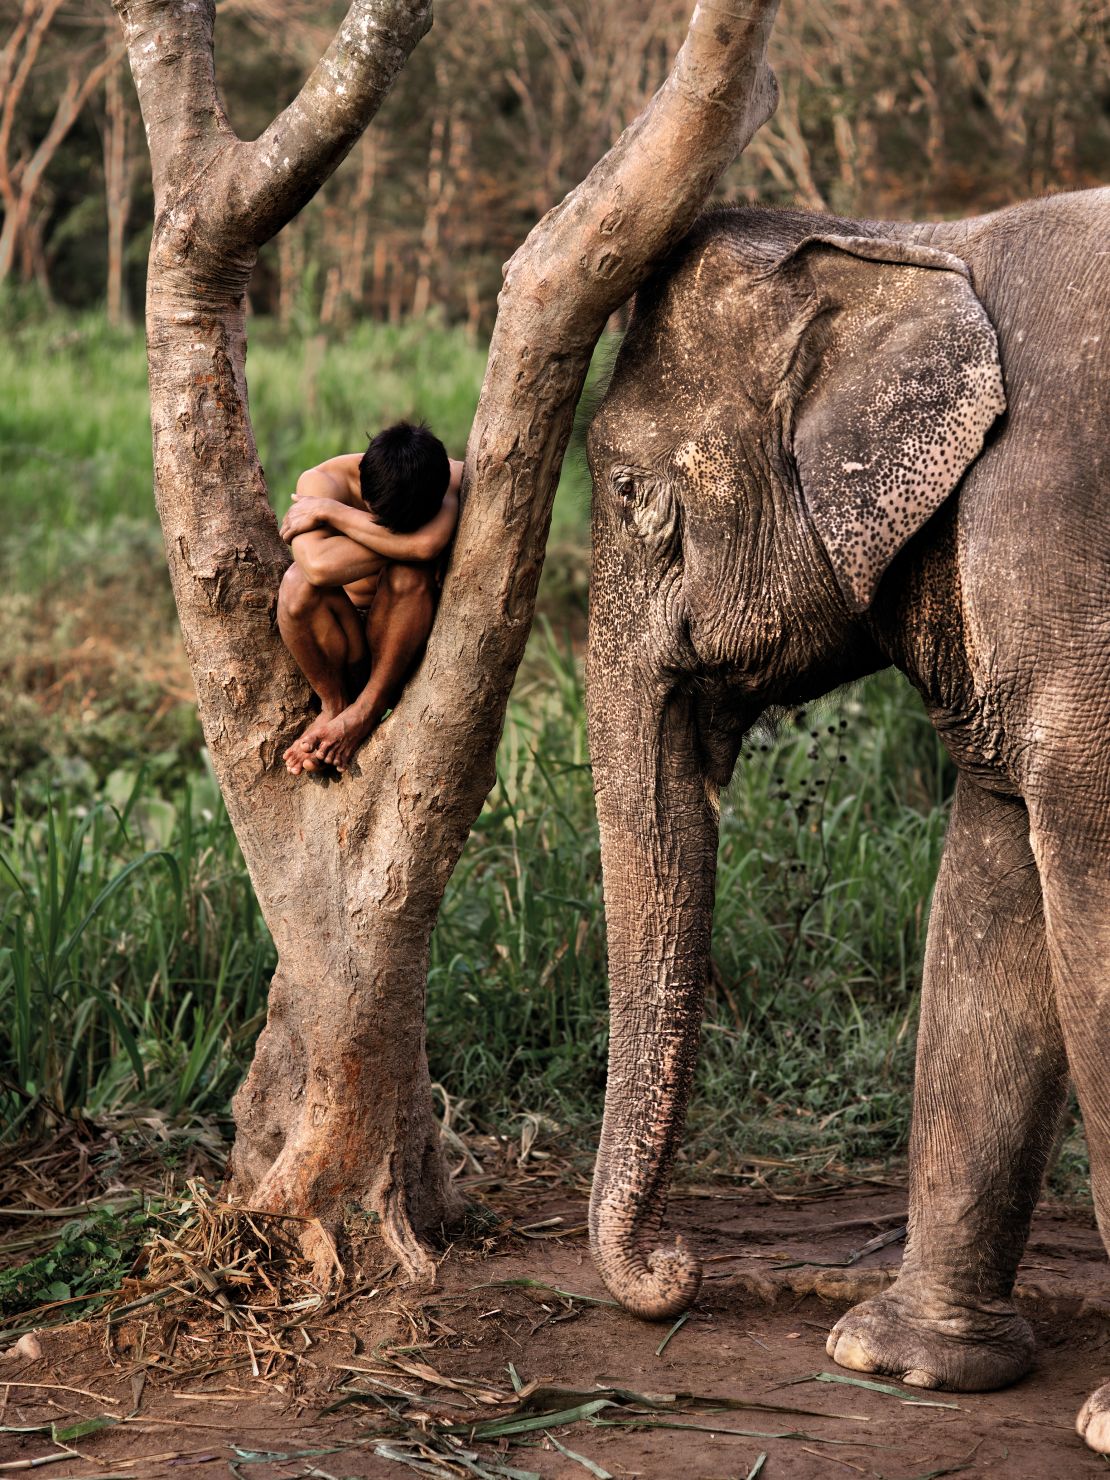 A Mahout and his elephant at a sanctuary. Chiang Mai, Thailand, 2010.